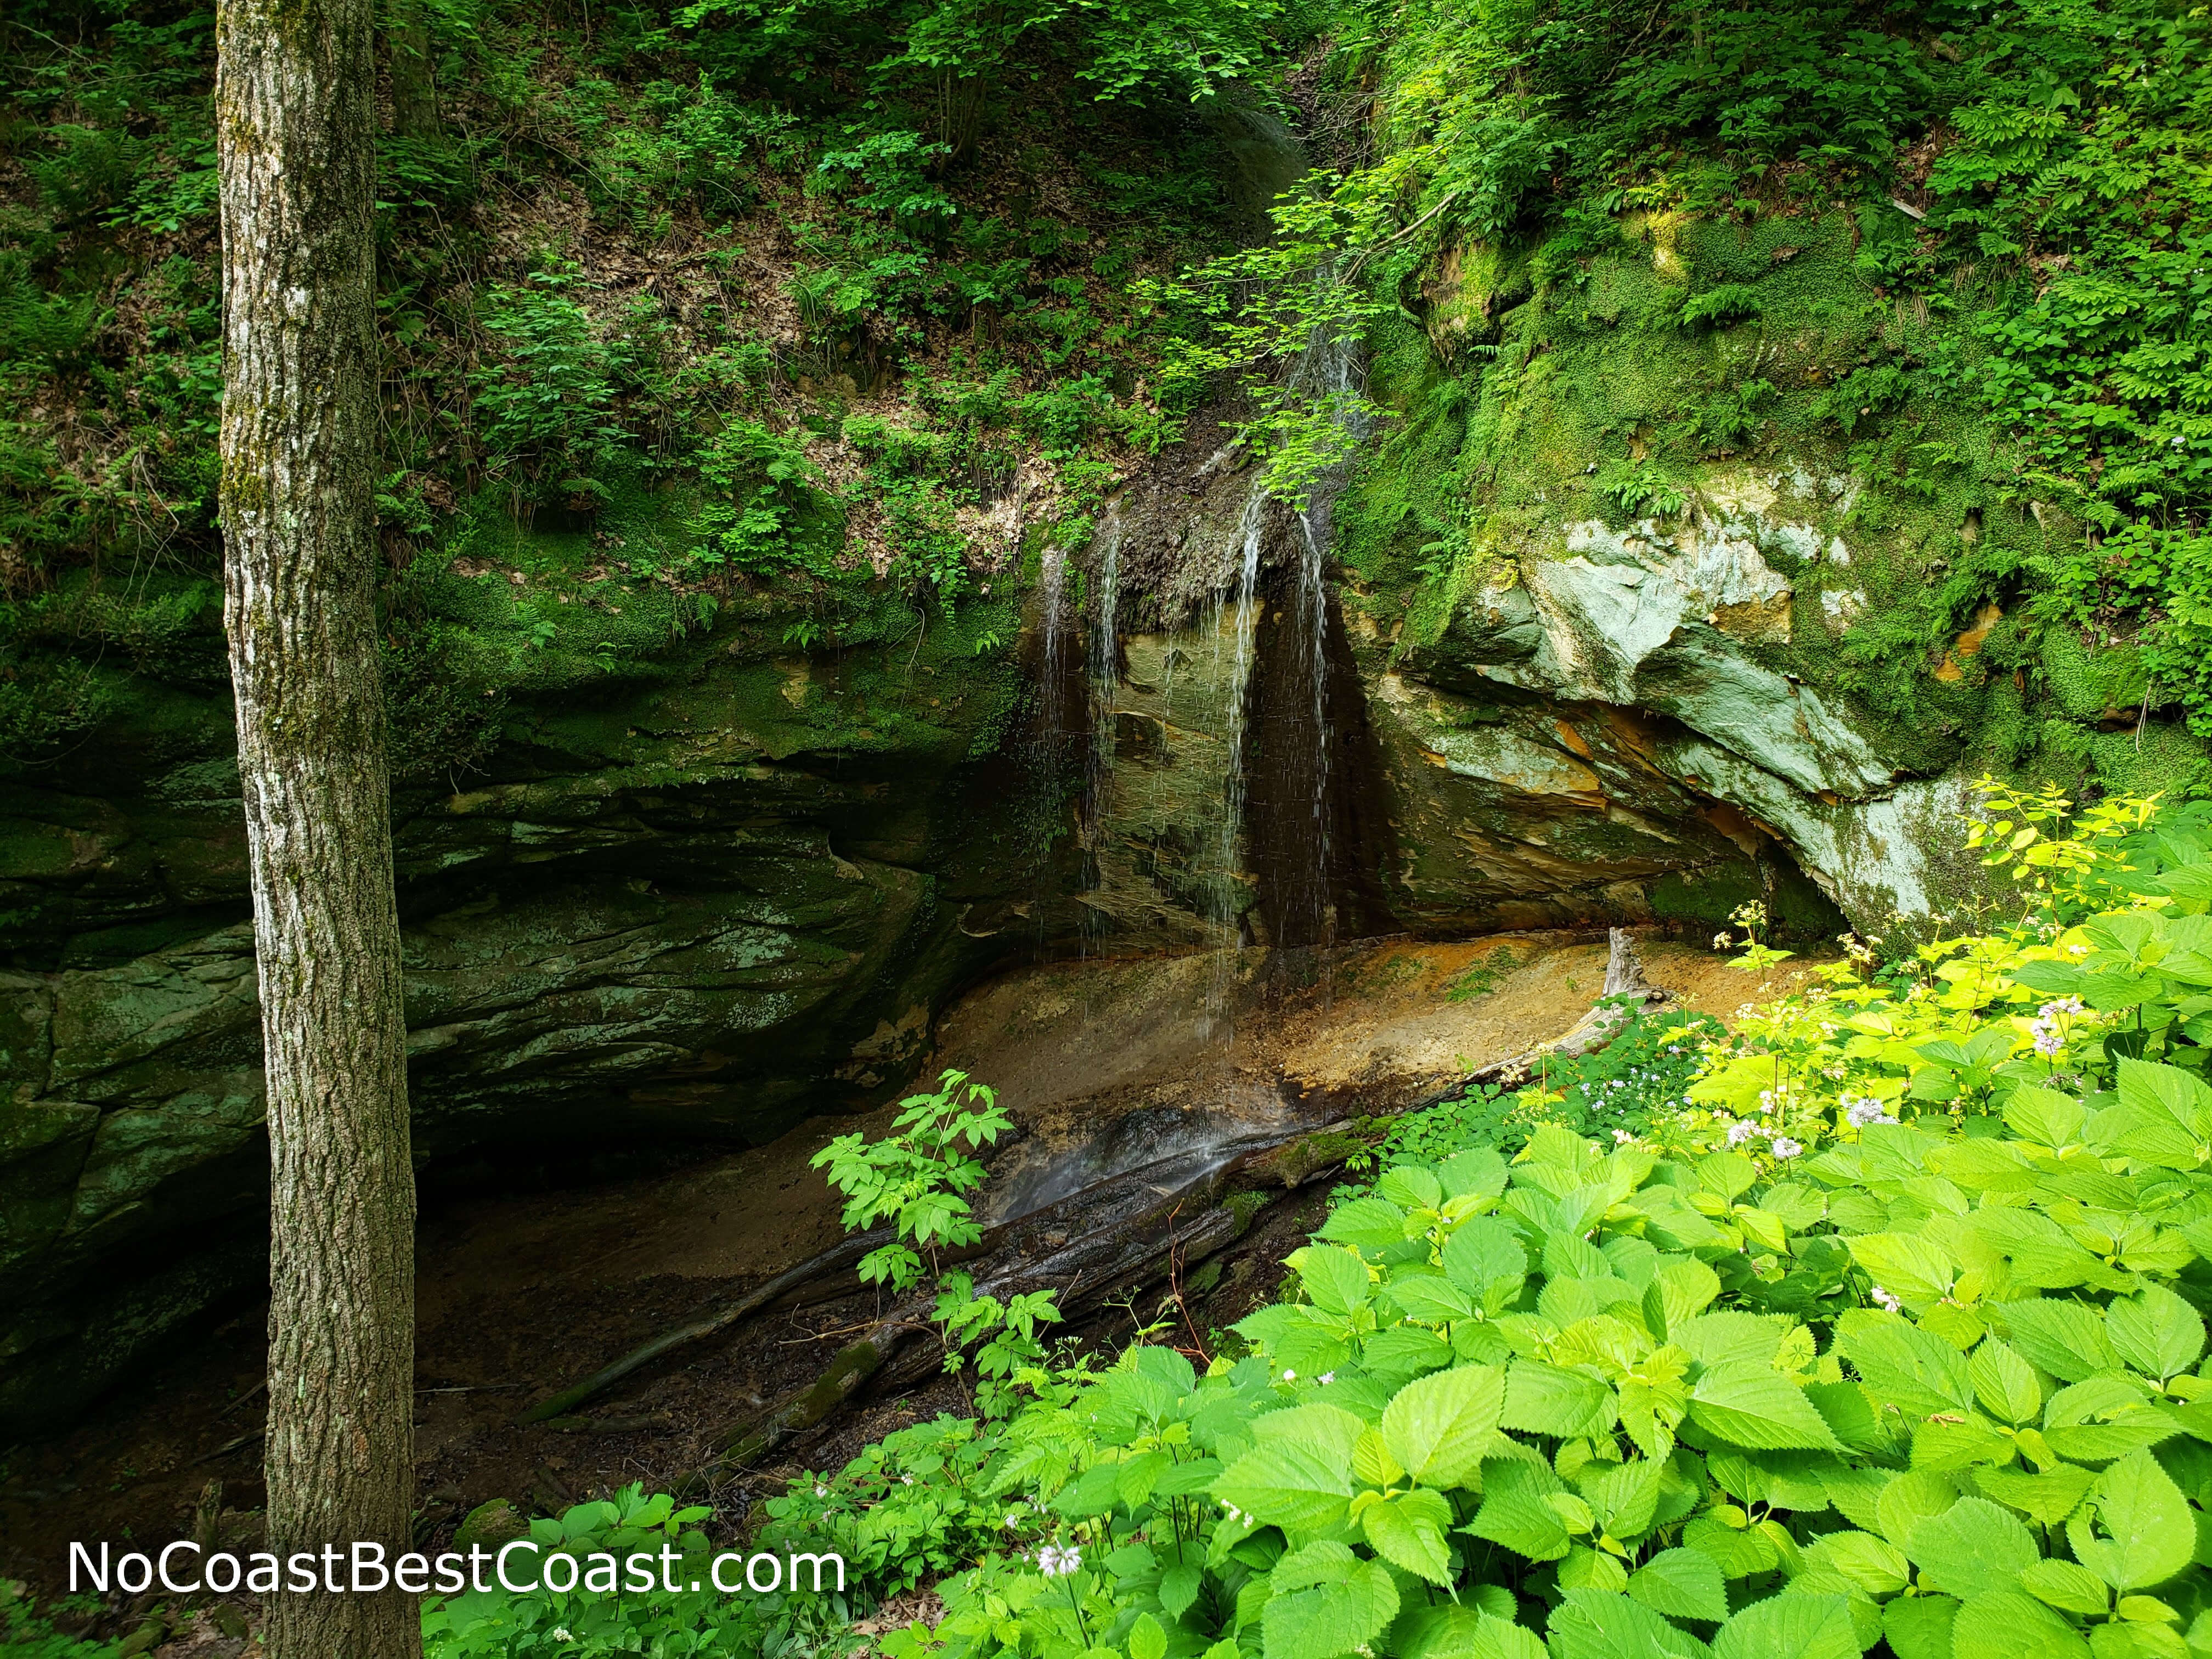 The mossy waterfall at Little Sand Cave